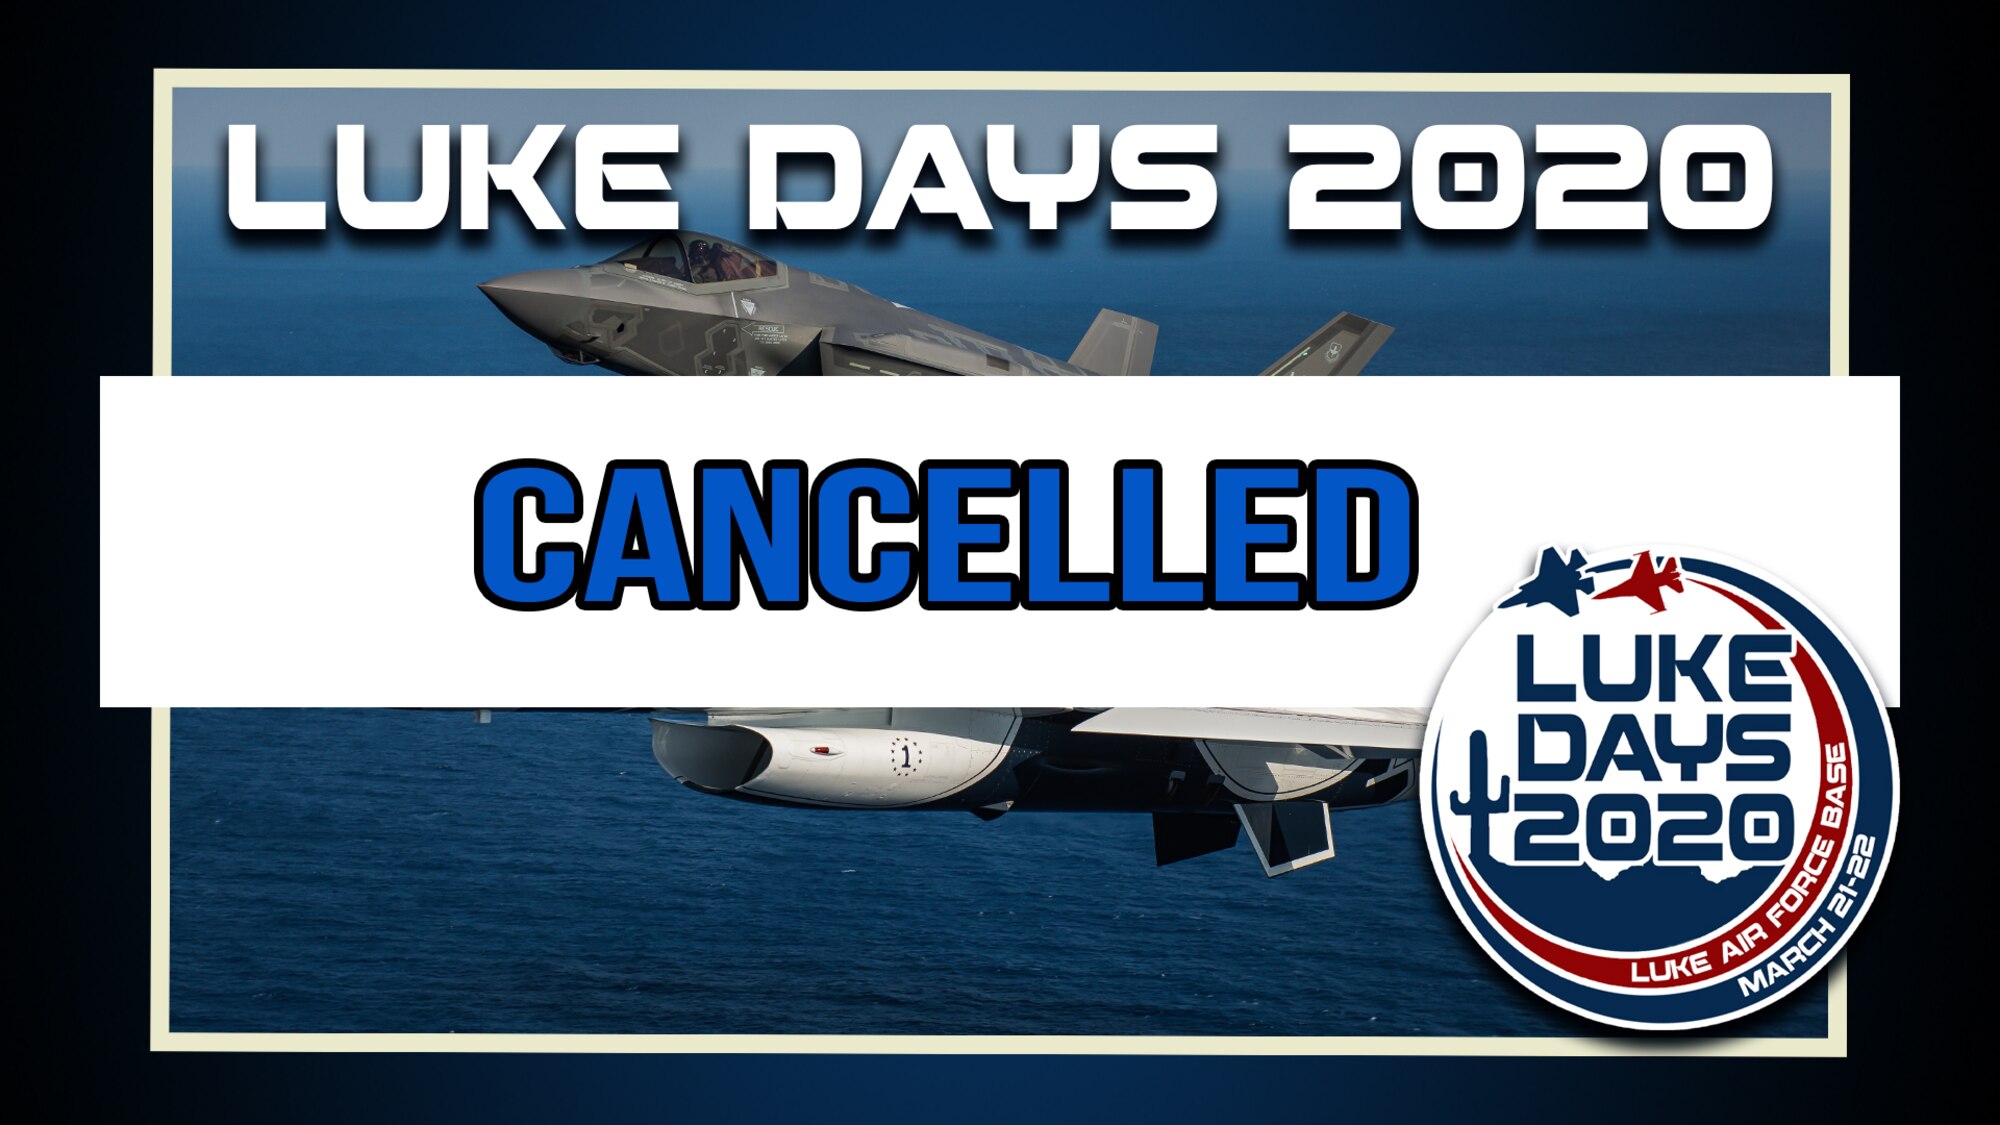 The Luke Days 2020 airshow scheduled for March 21-22, 2020 is cancelled due to growing COVID-19 concerns and to mitigate health risks to attendees.